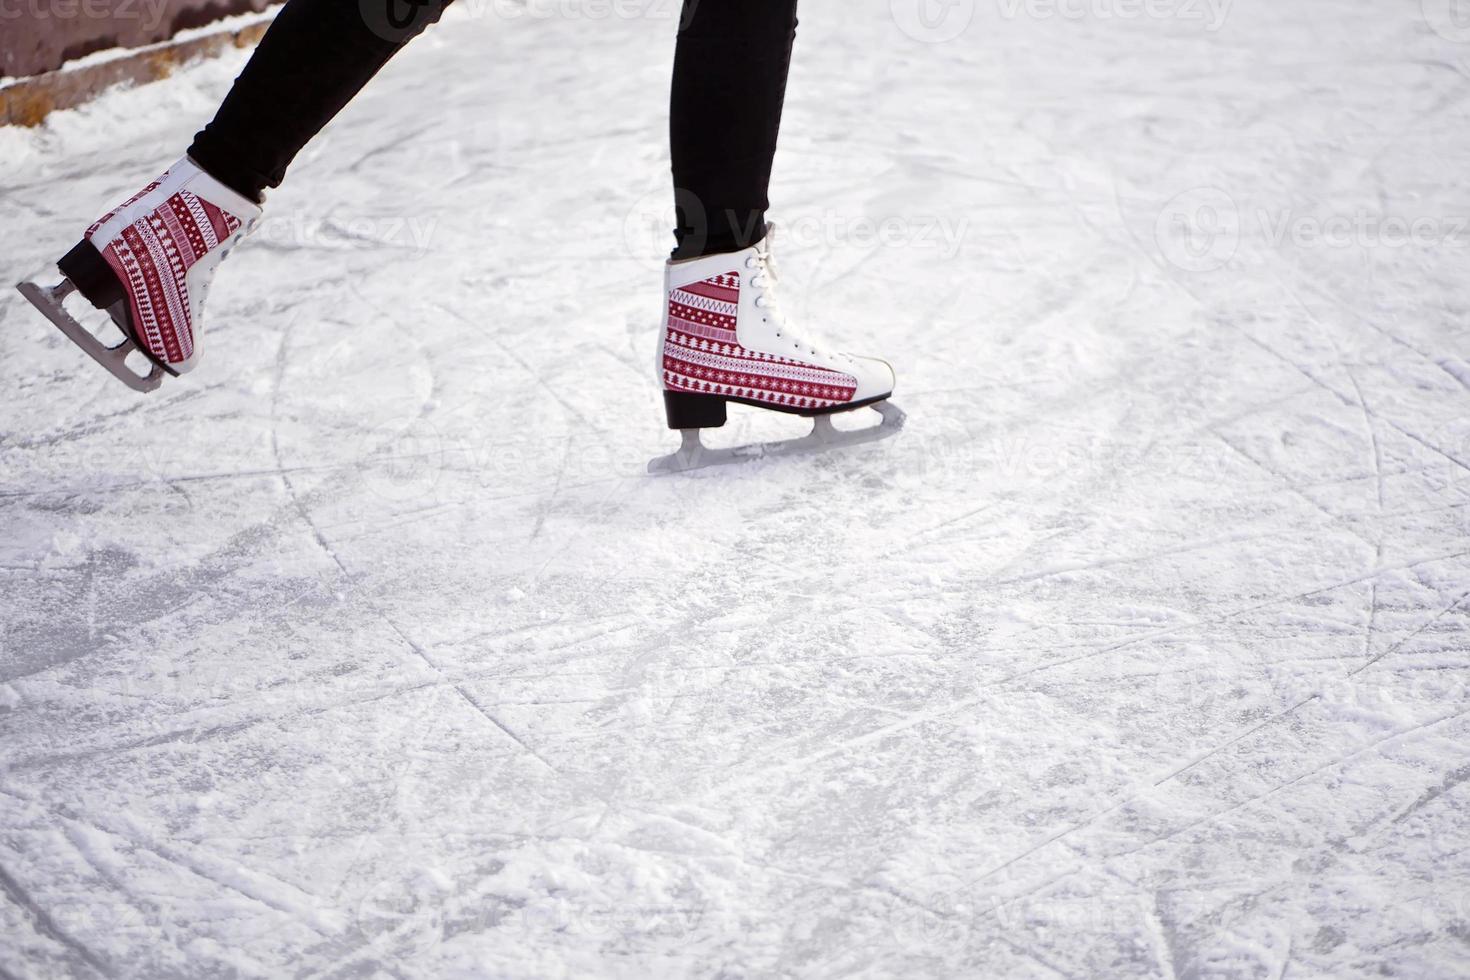 Girl riding on an ice rink. Ice and skates. Man's feet in skates photo